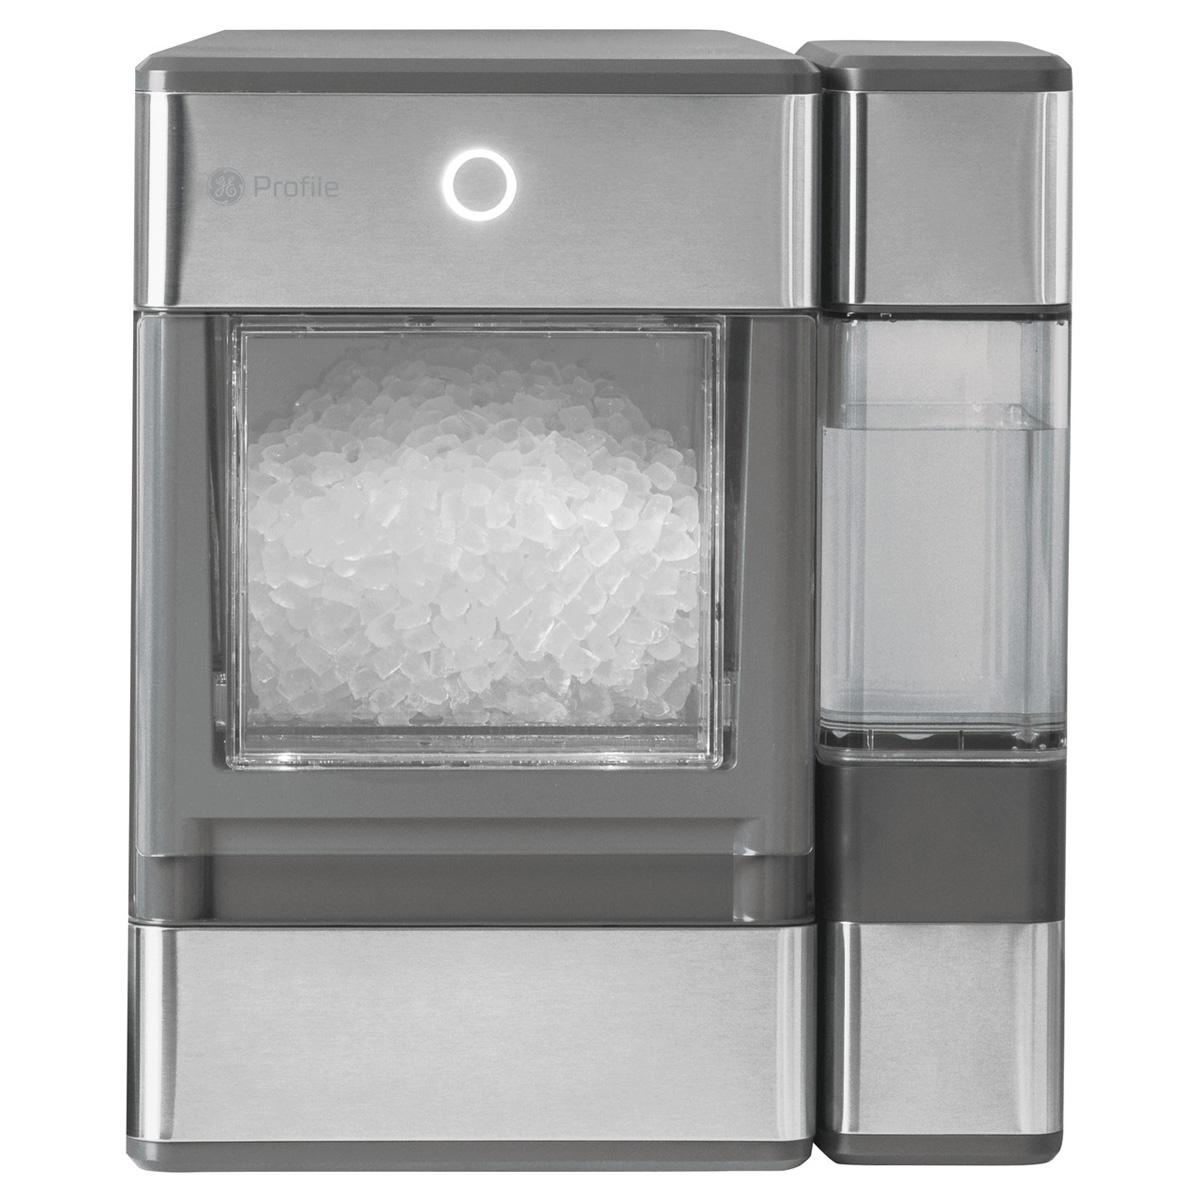 GE Opal Nugget Ice Maker with Side Tank for $424.99